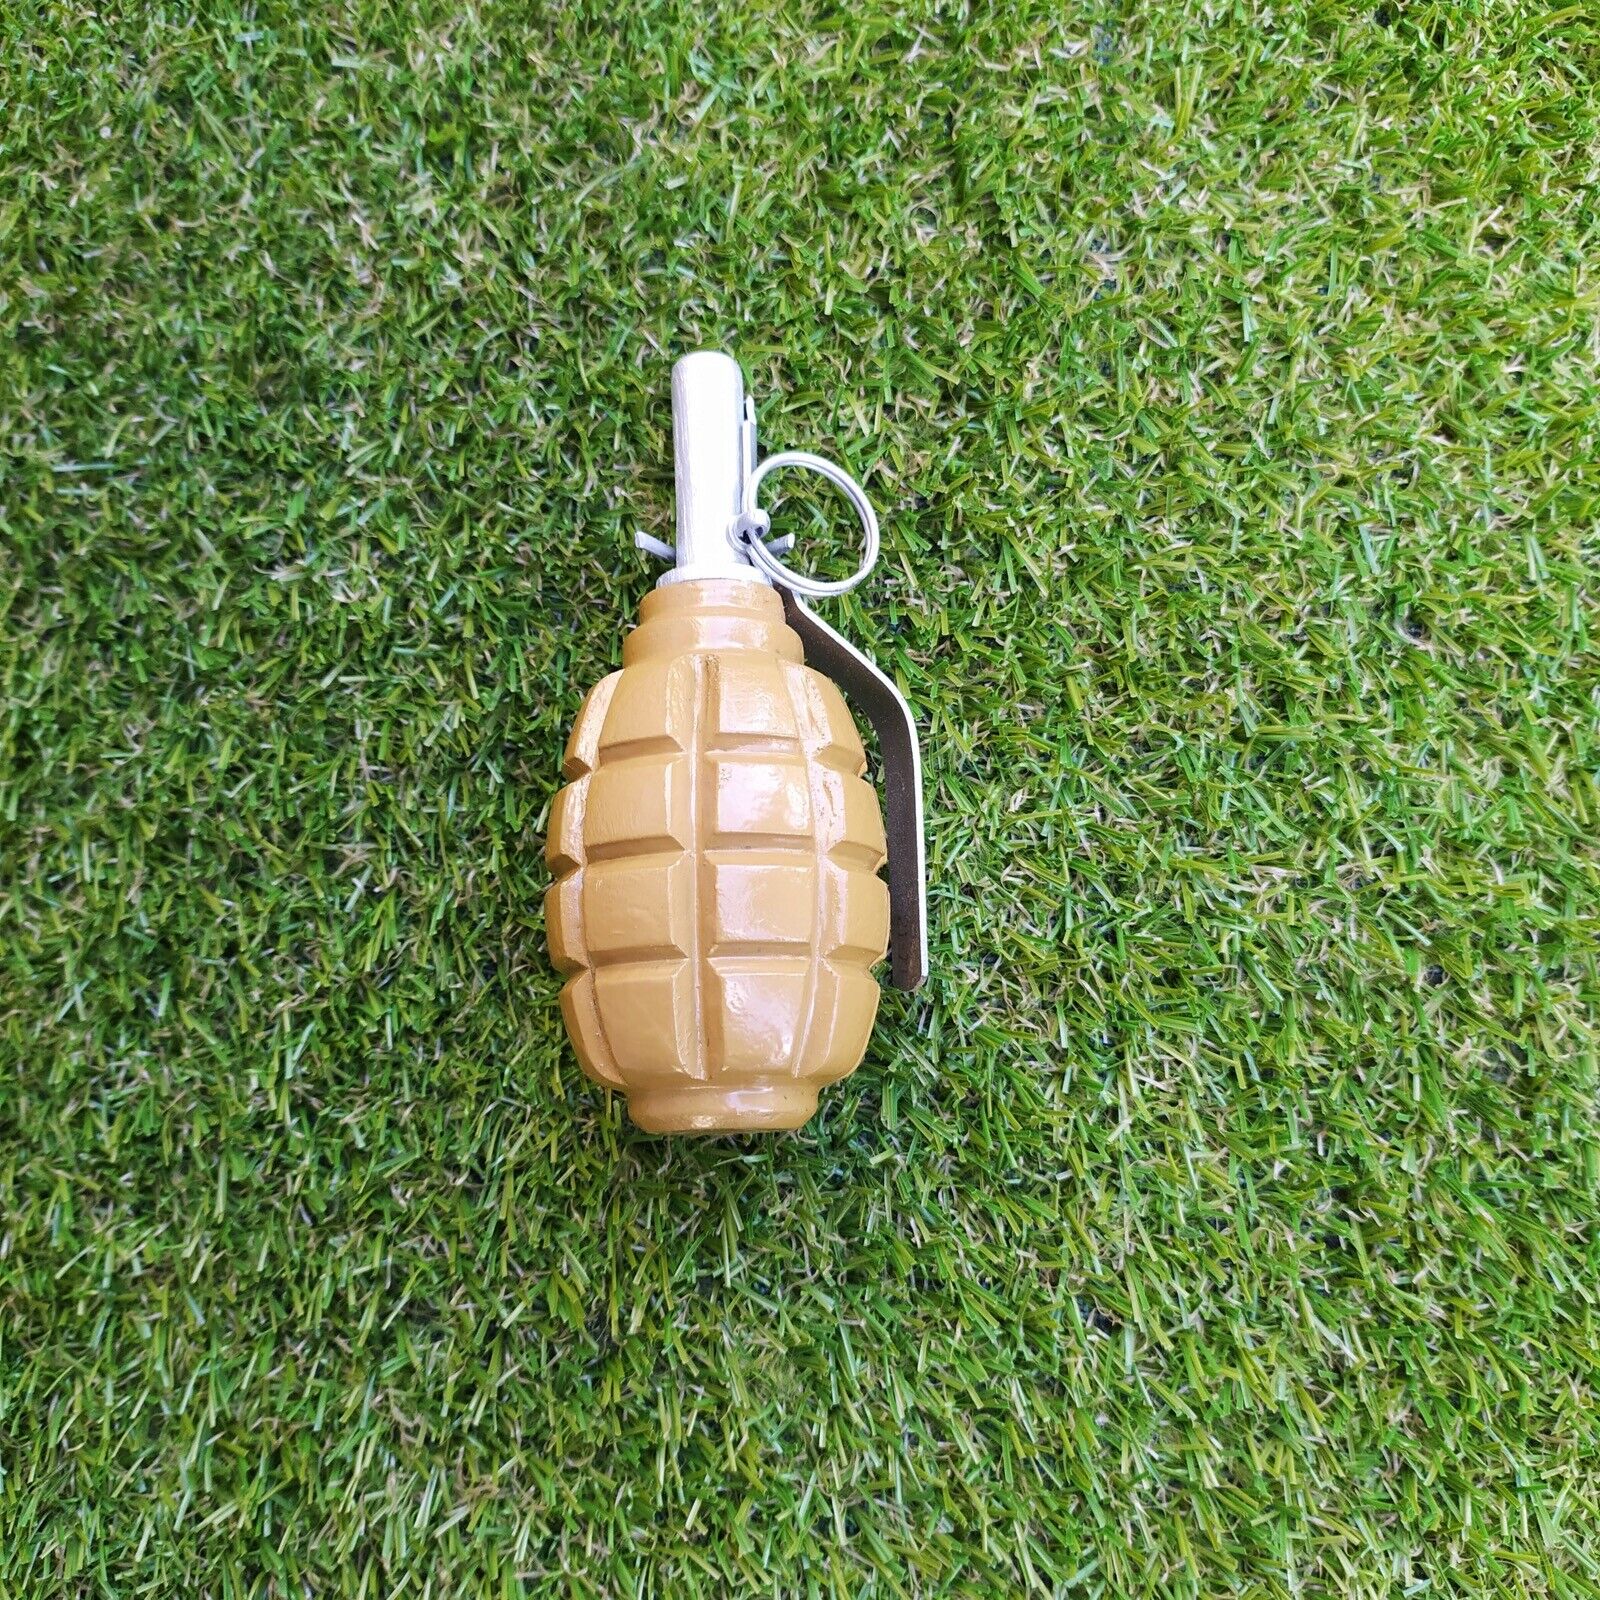 Replica Hand Grenade F1 Soviet Union WWI. Wooden Material Perfect Pained Copy